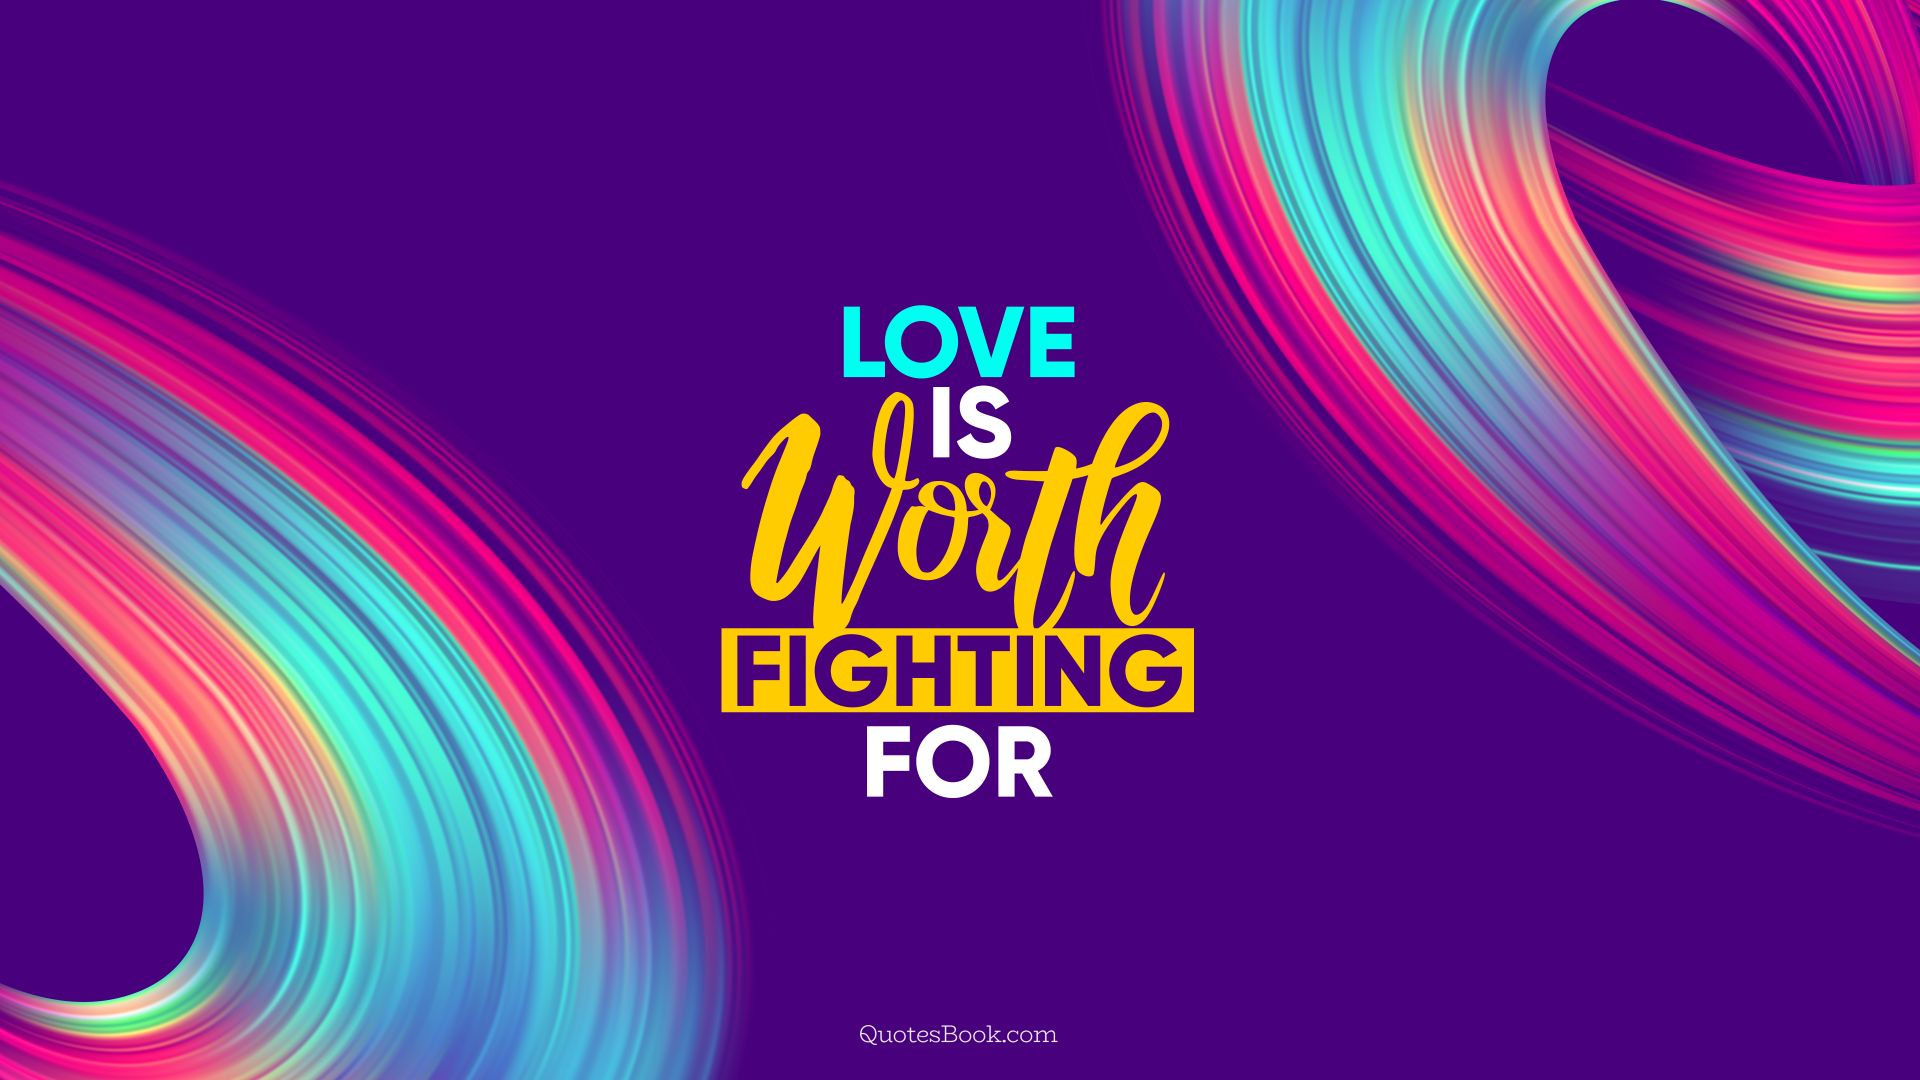 Love is worth fighting for. - Quote by QuotesBook